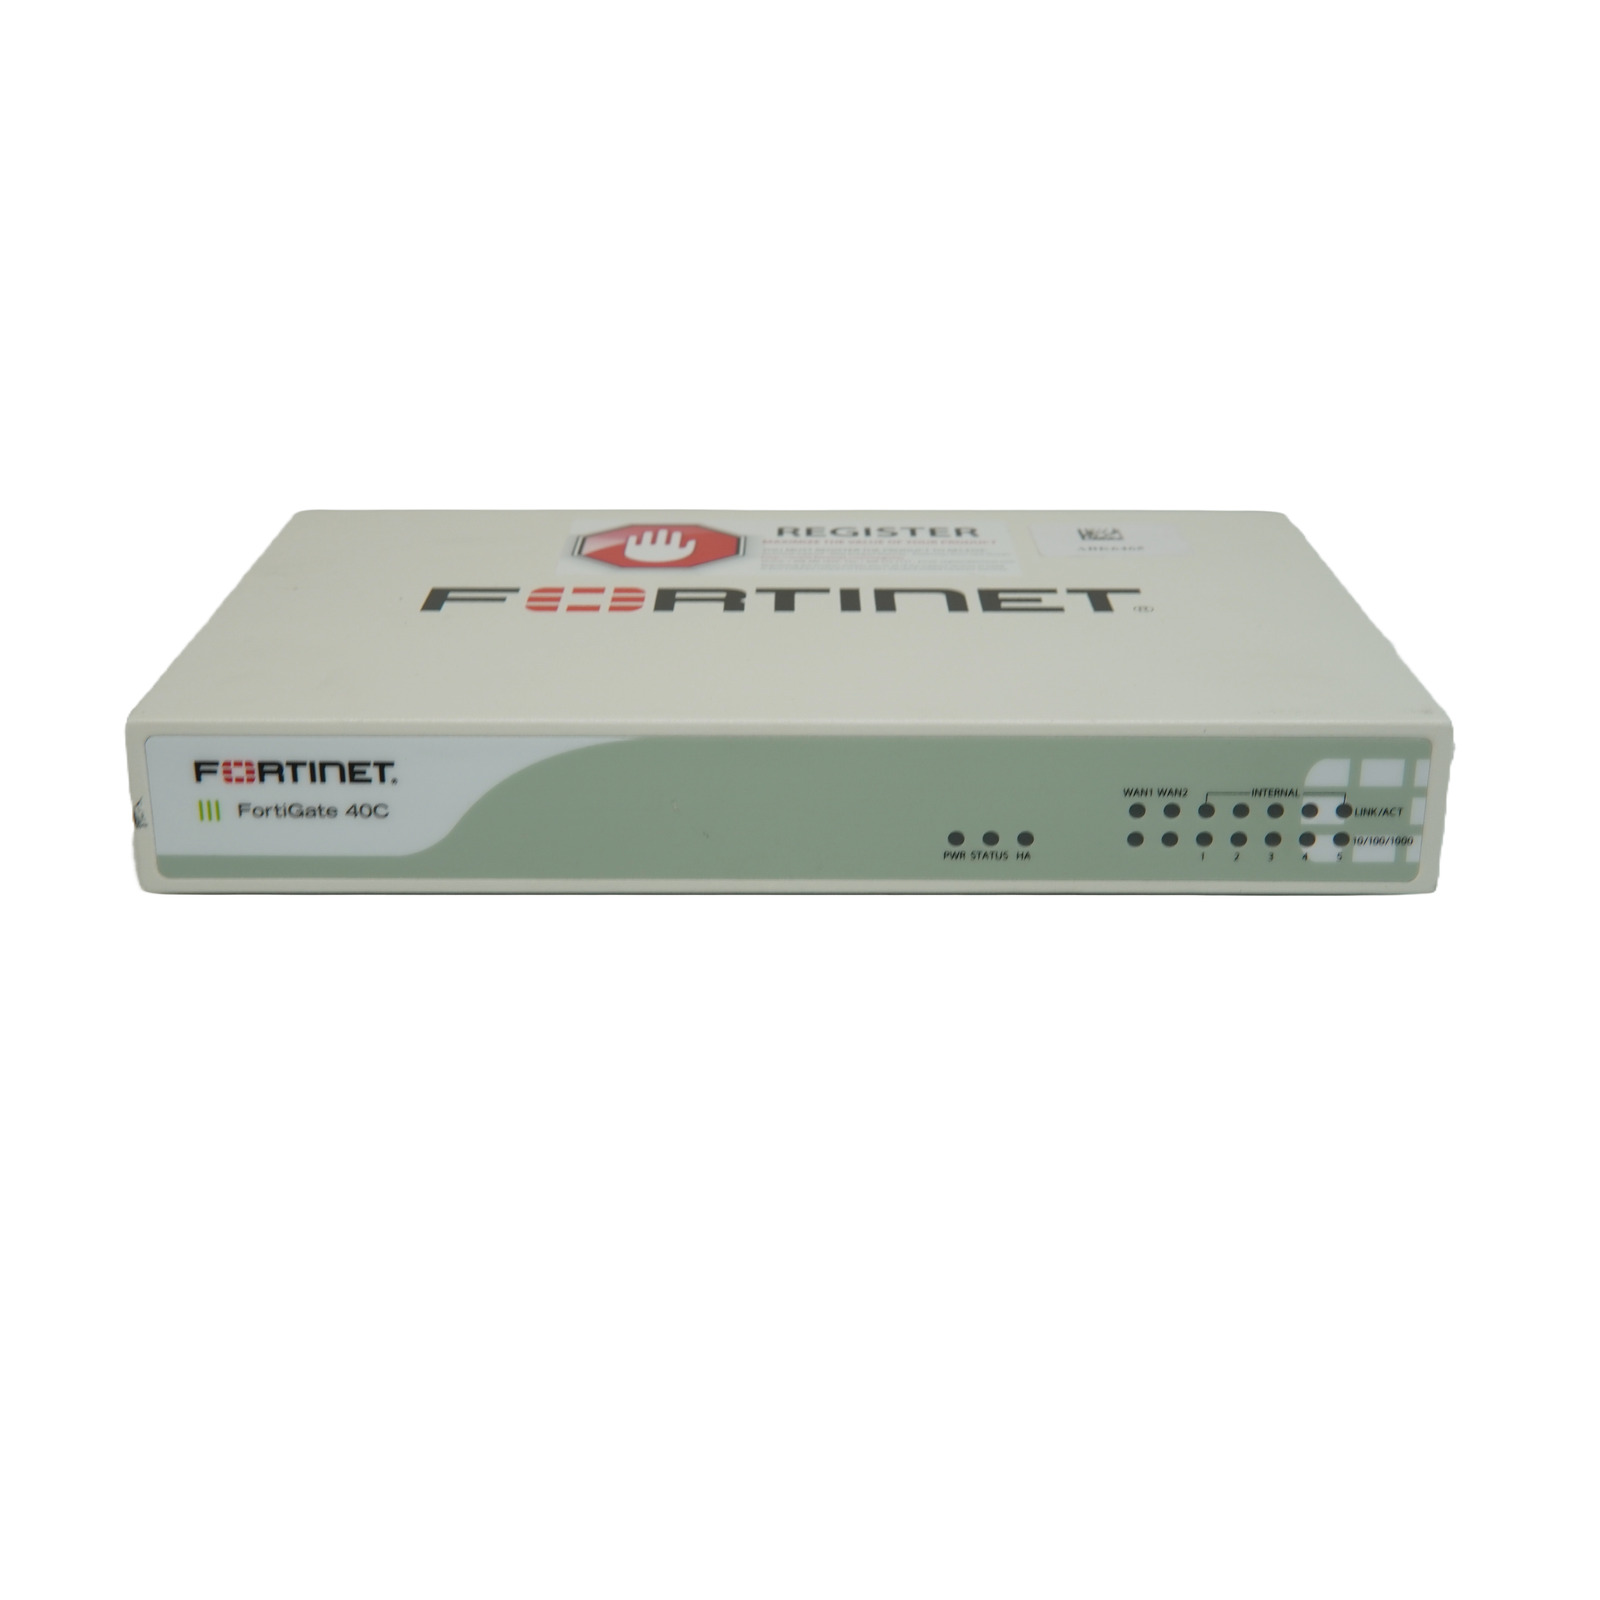 Fortinet FortiGate-40C Network Security Firewall